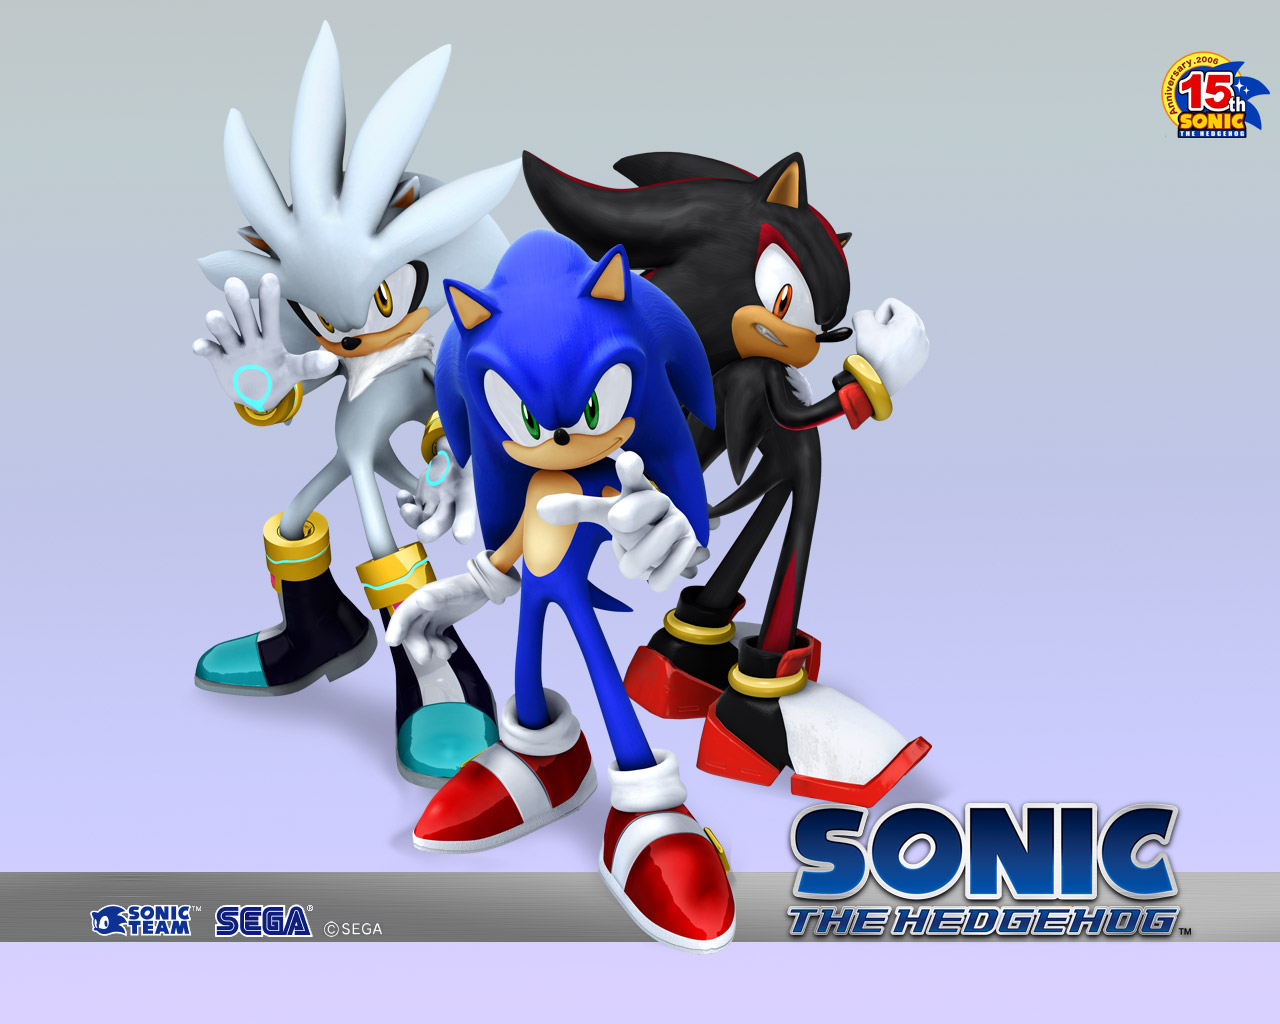 SonicShadow and Silver   the sonic site 1280x1024